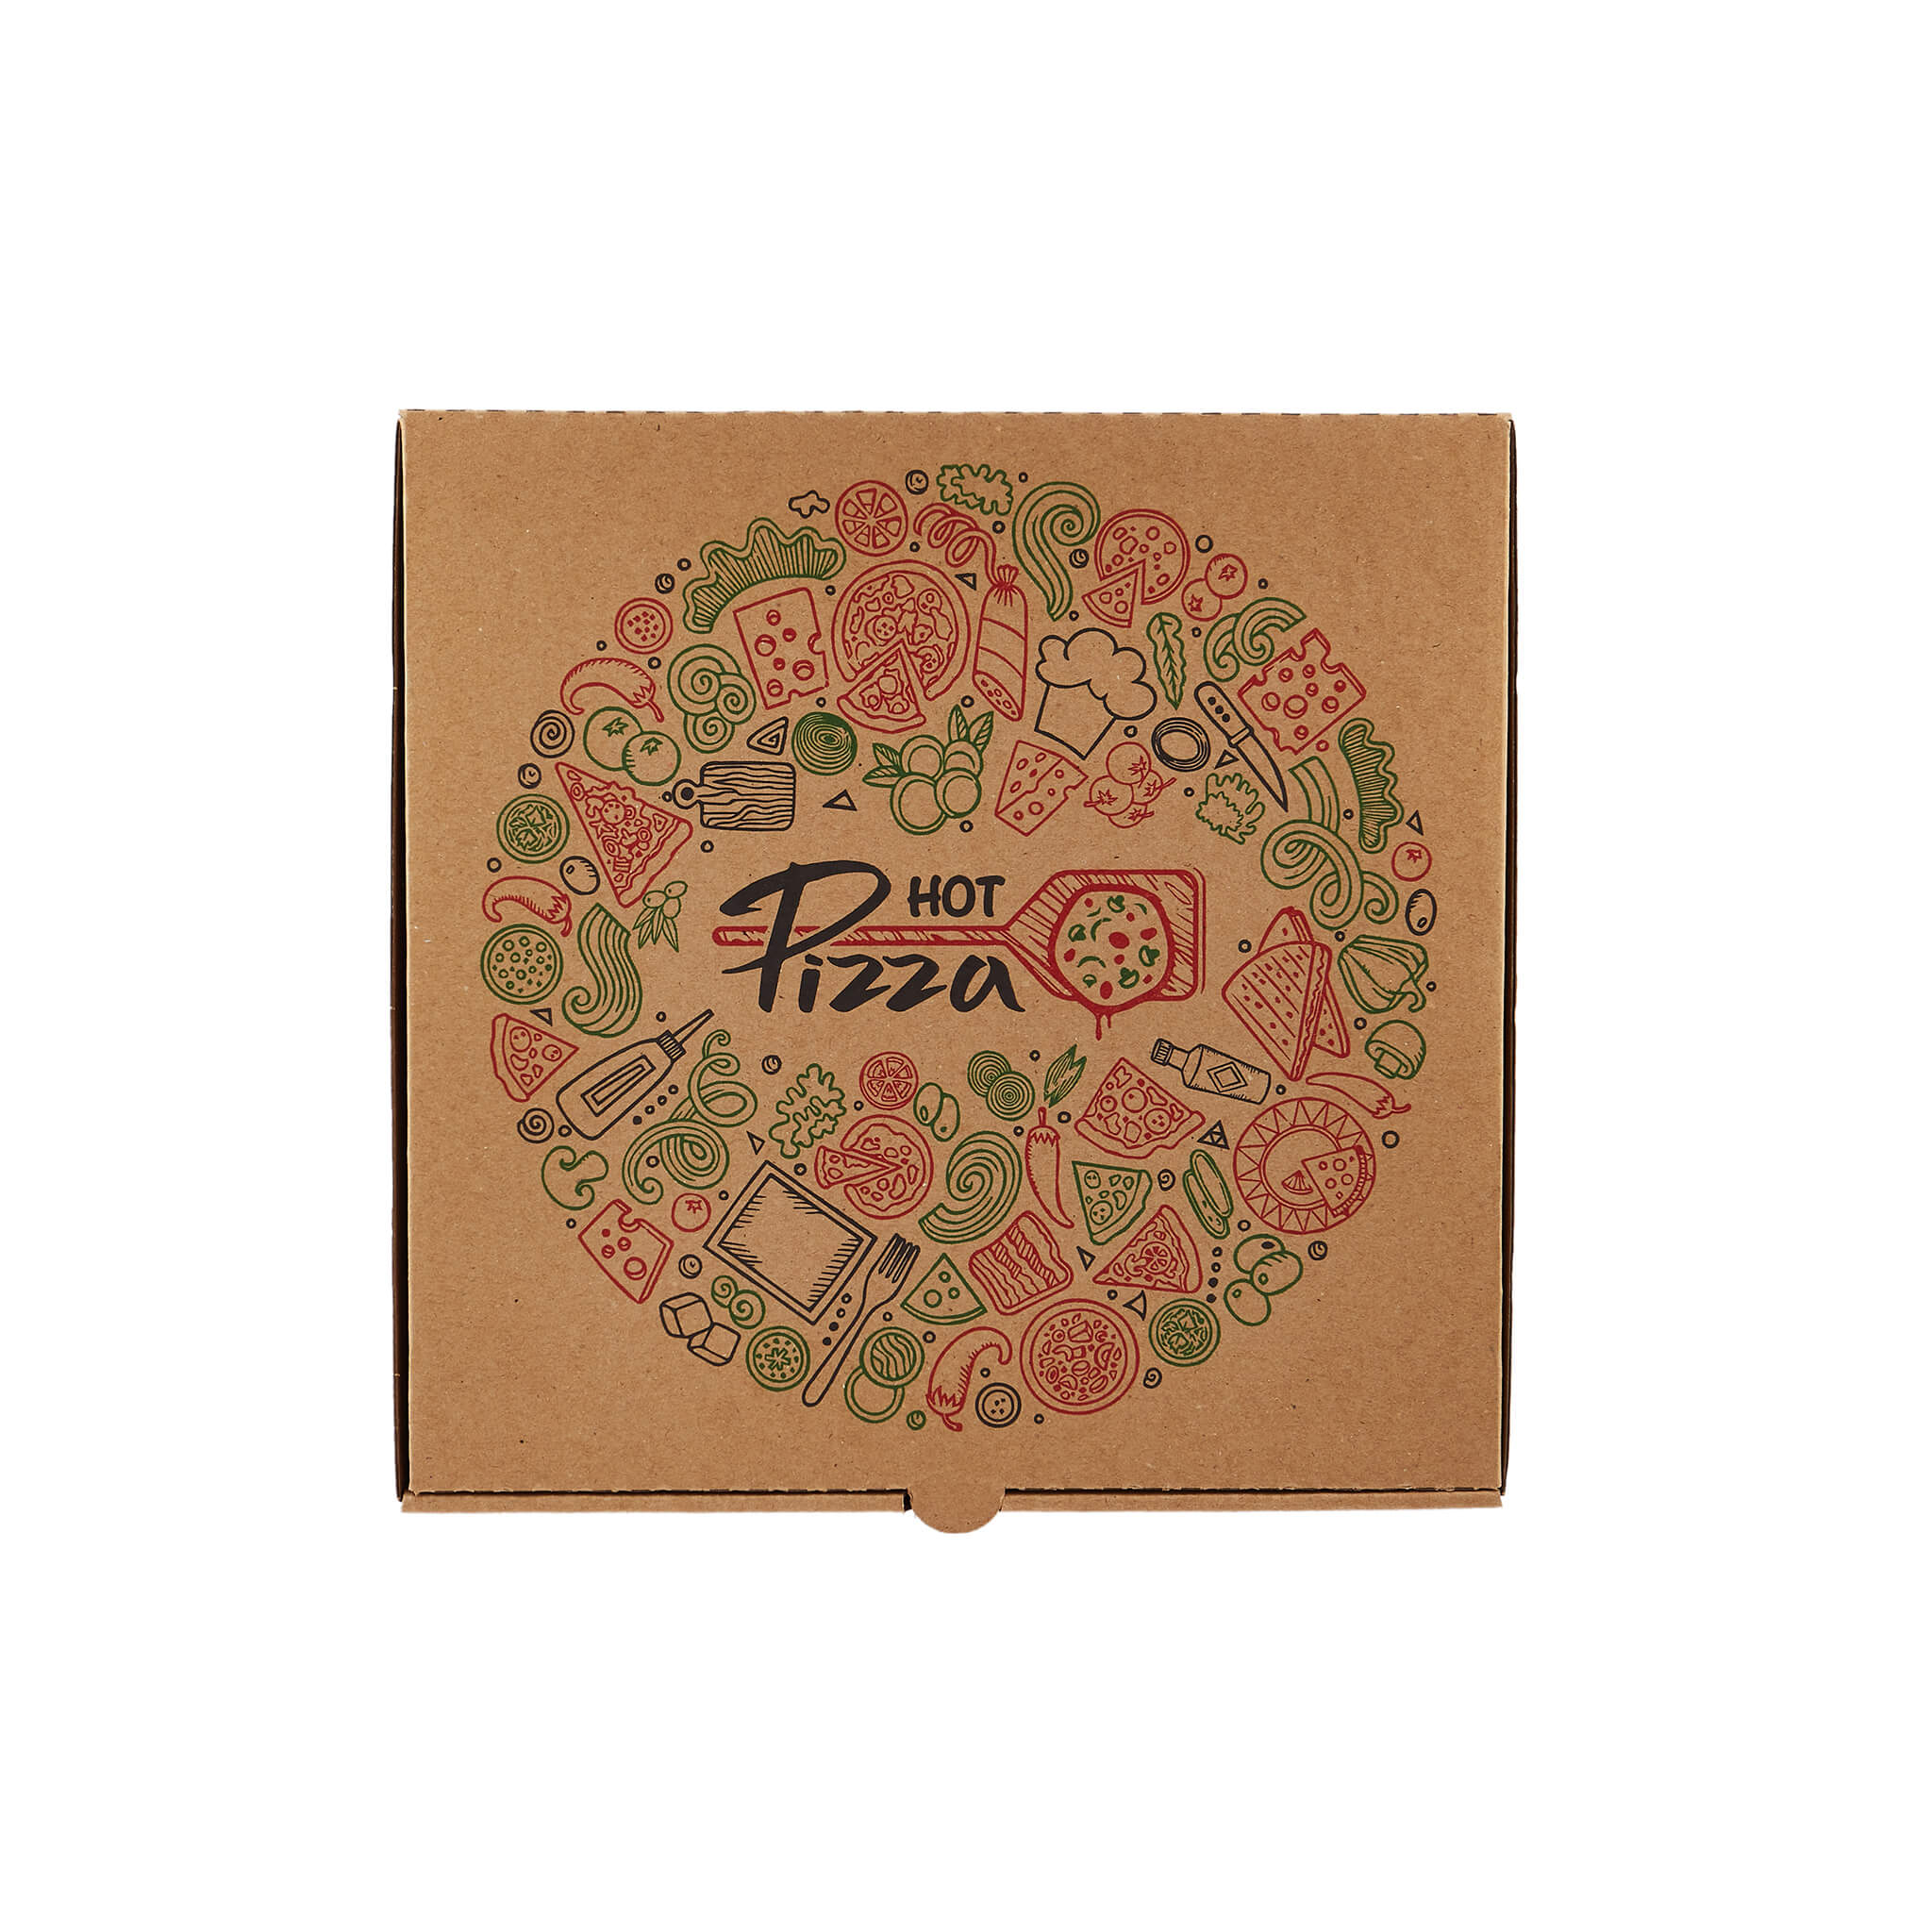 100 Pieces Printed Pizza Box-Large